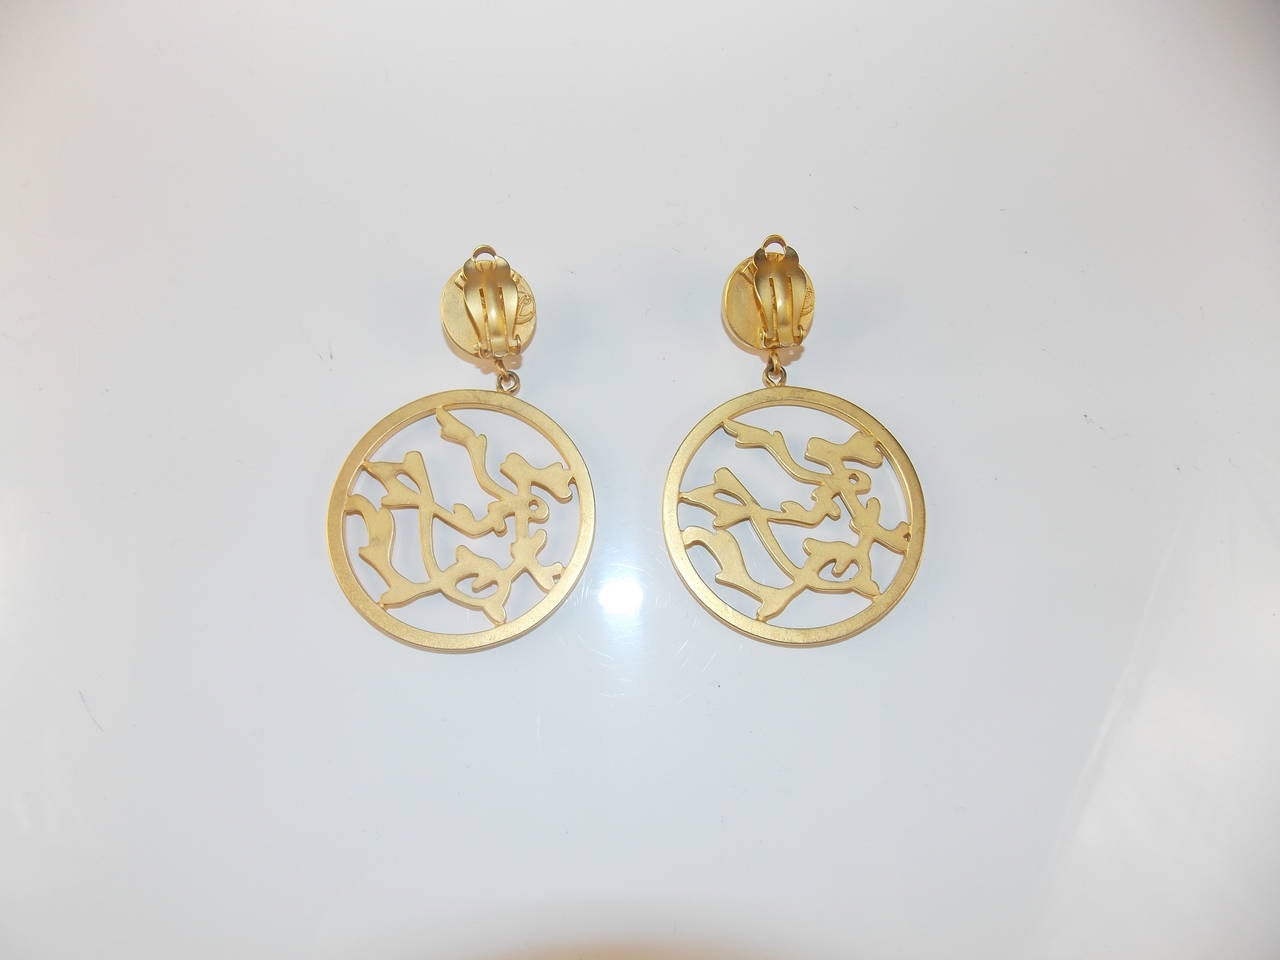 Karl Lagerfeld gold resin turquoise cabochon clip earrings with stunning branch detail in circle drop.